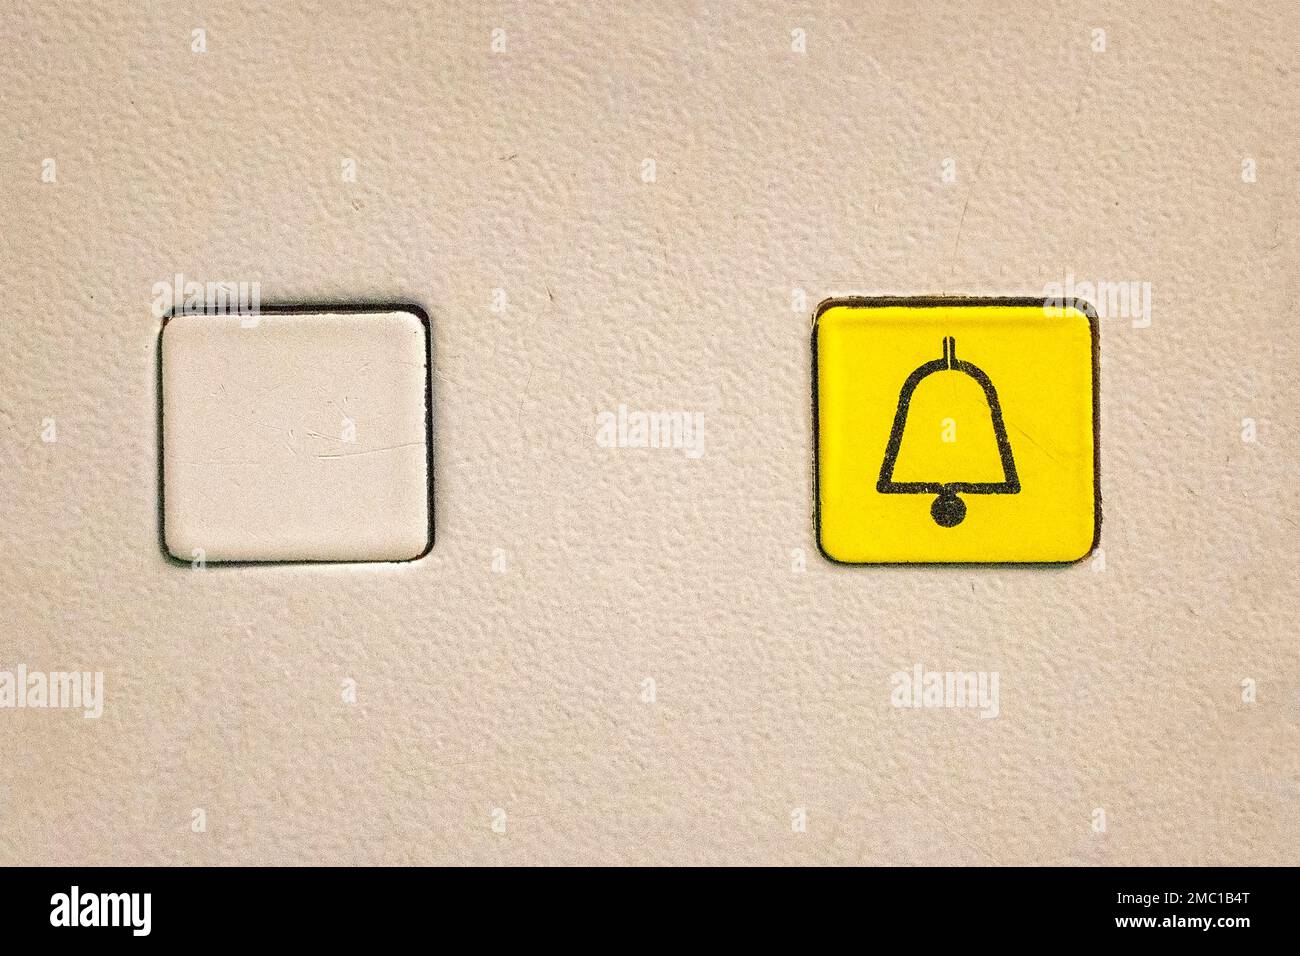 Yellow square elevator button to call help in an emergency situation Stock Photo